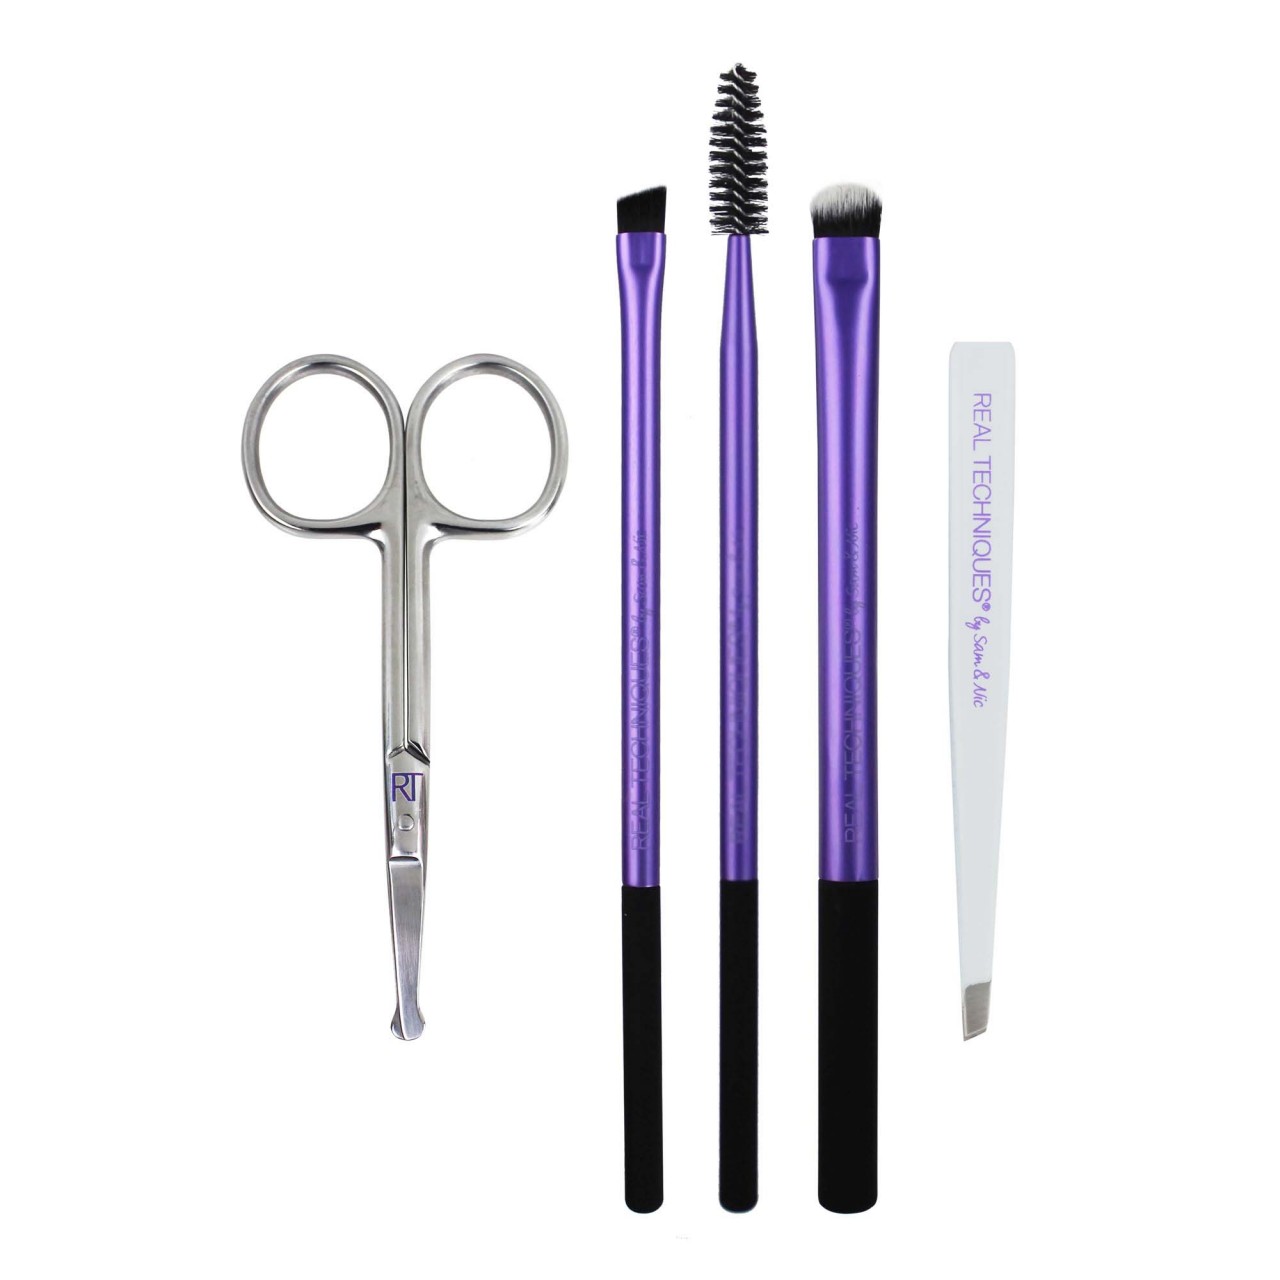 Real Techniques - Brow Set - 